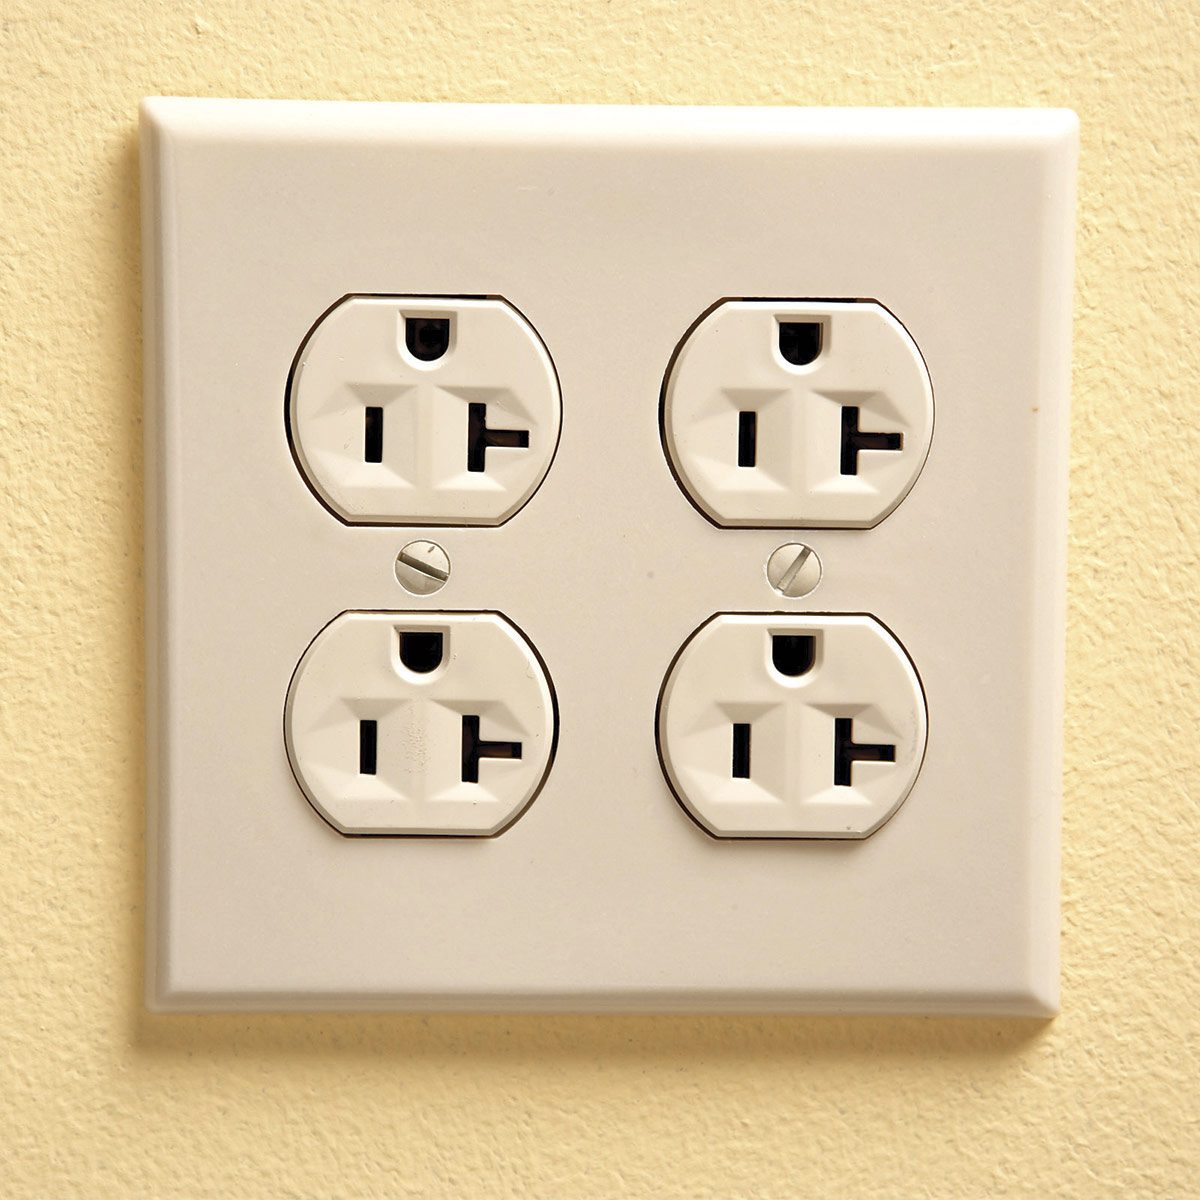 How to instal electrical outlet